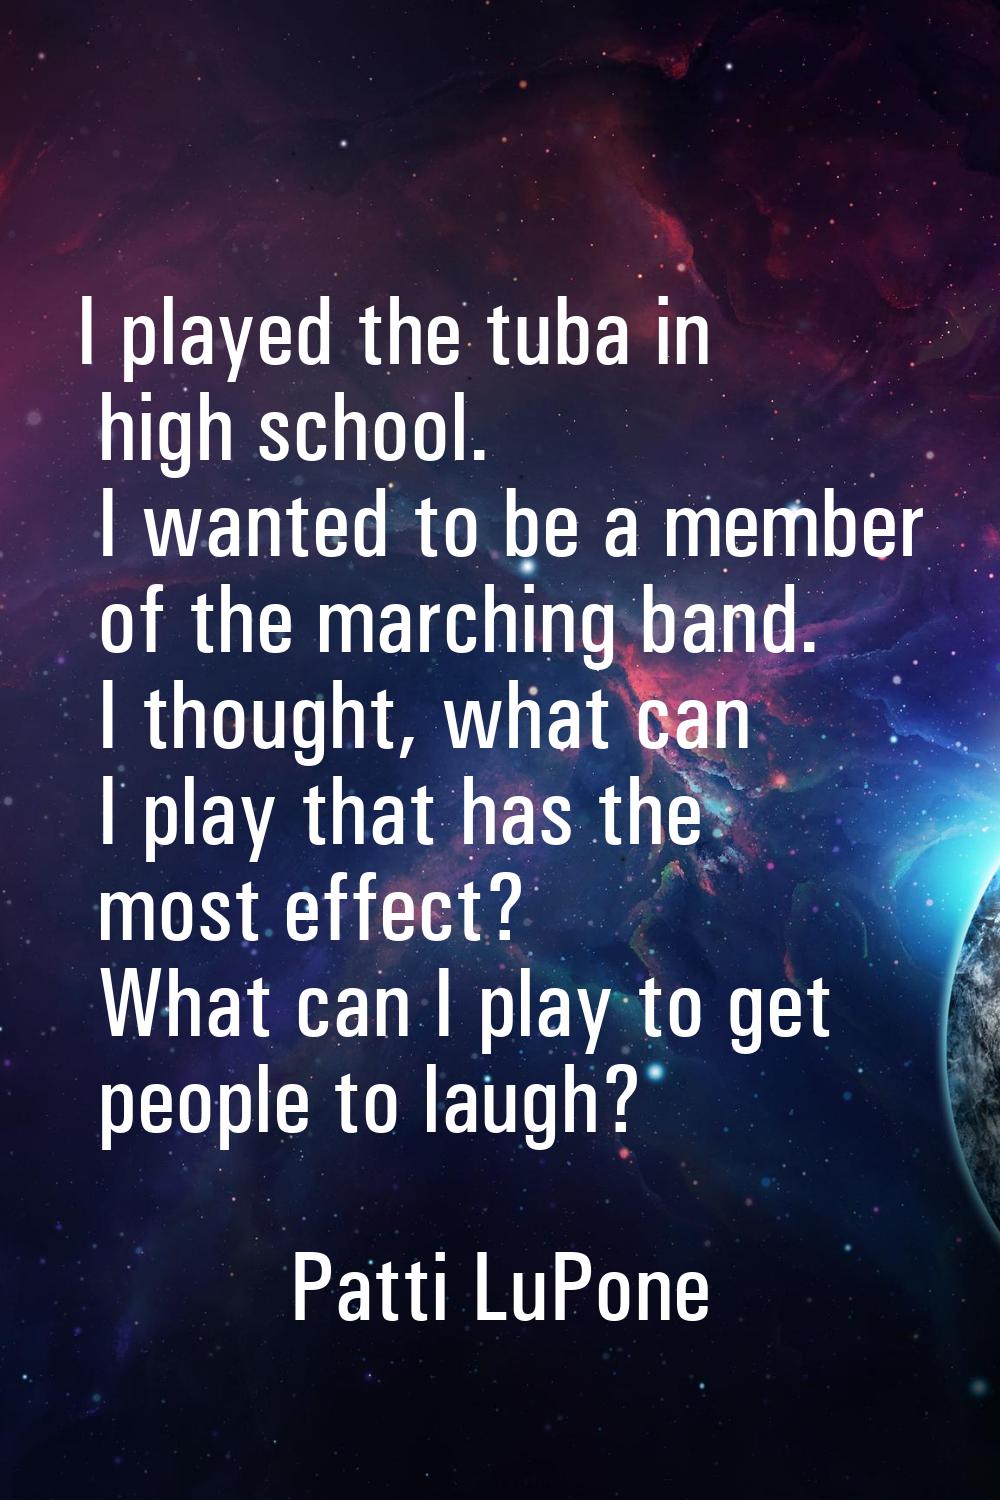 I played the tuba in high school. I wanted to be a member of the marching band. I thought, what can